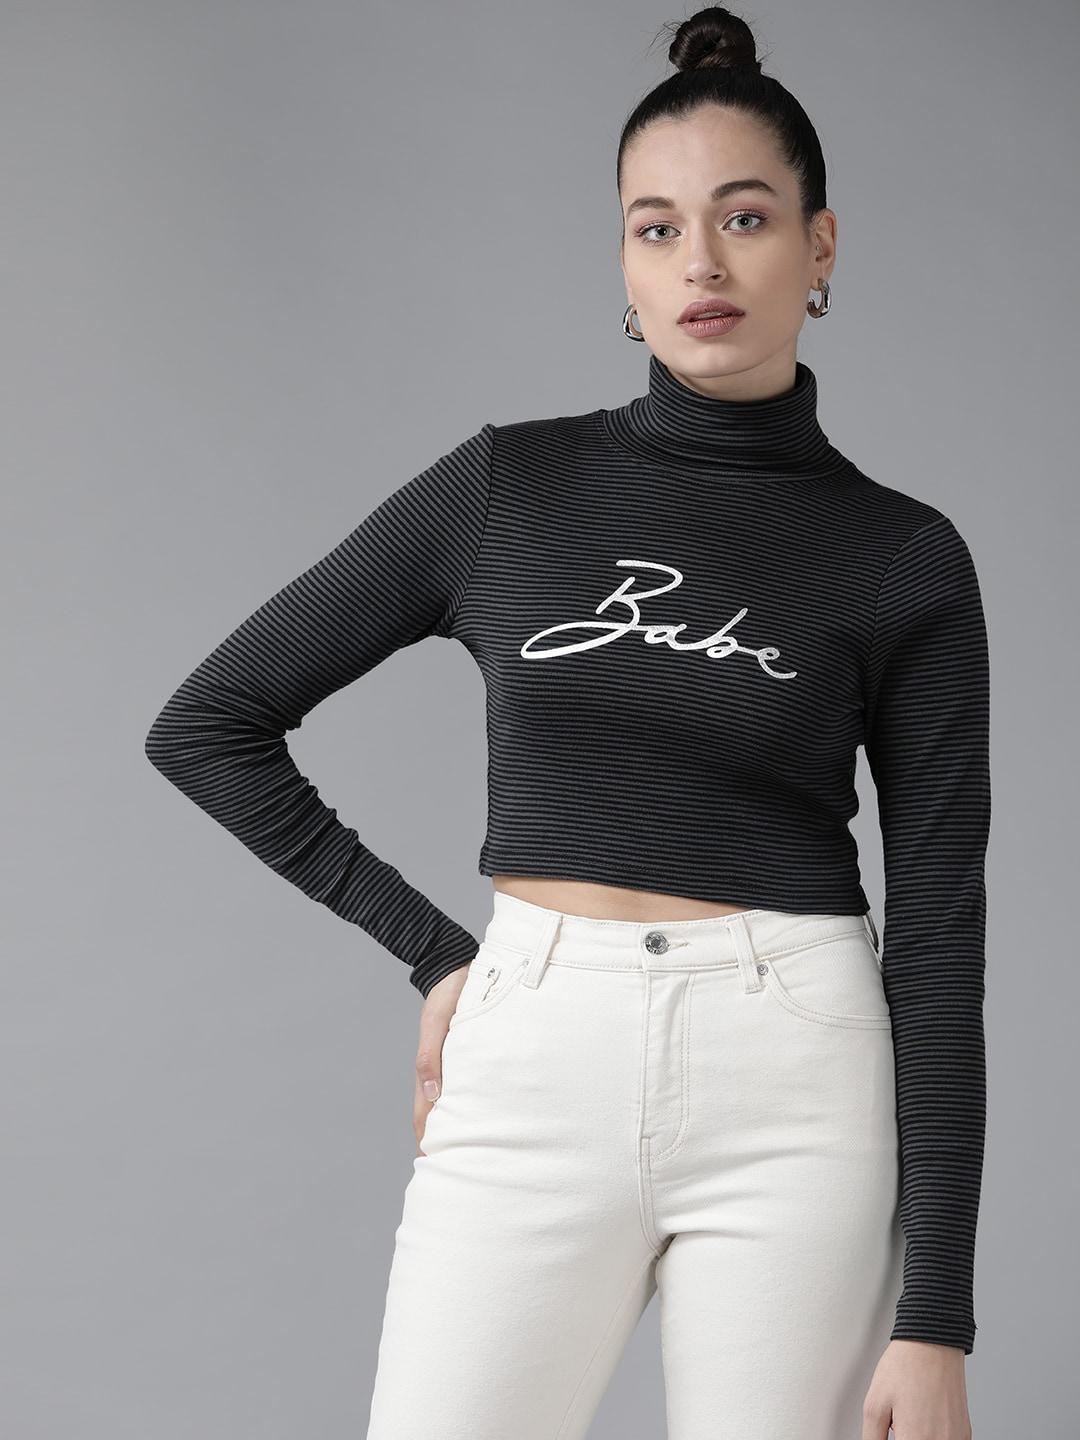 kassually-women-black-&-charcoal-grey-high-neck-pure-cotton-crop-top